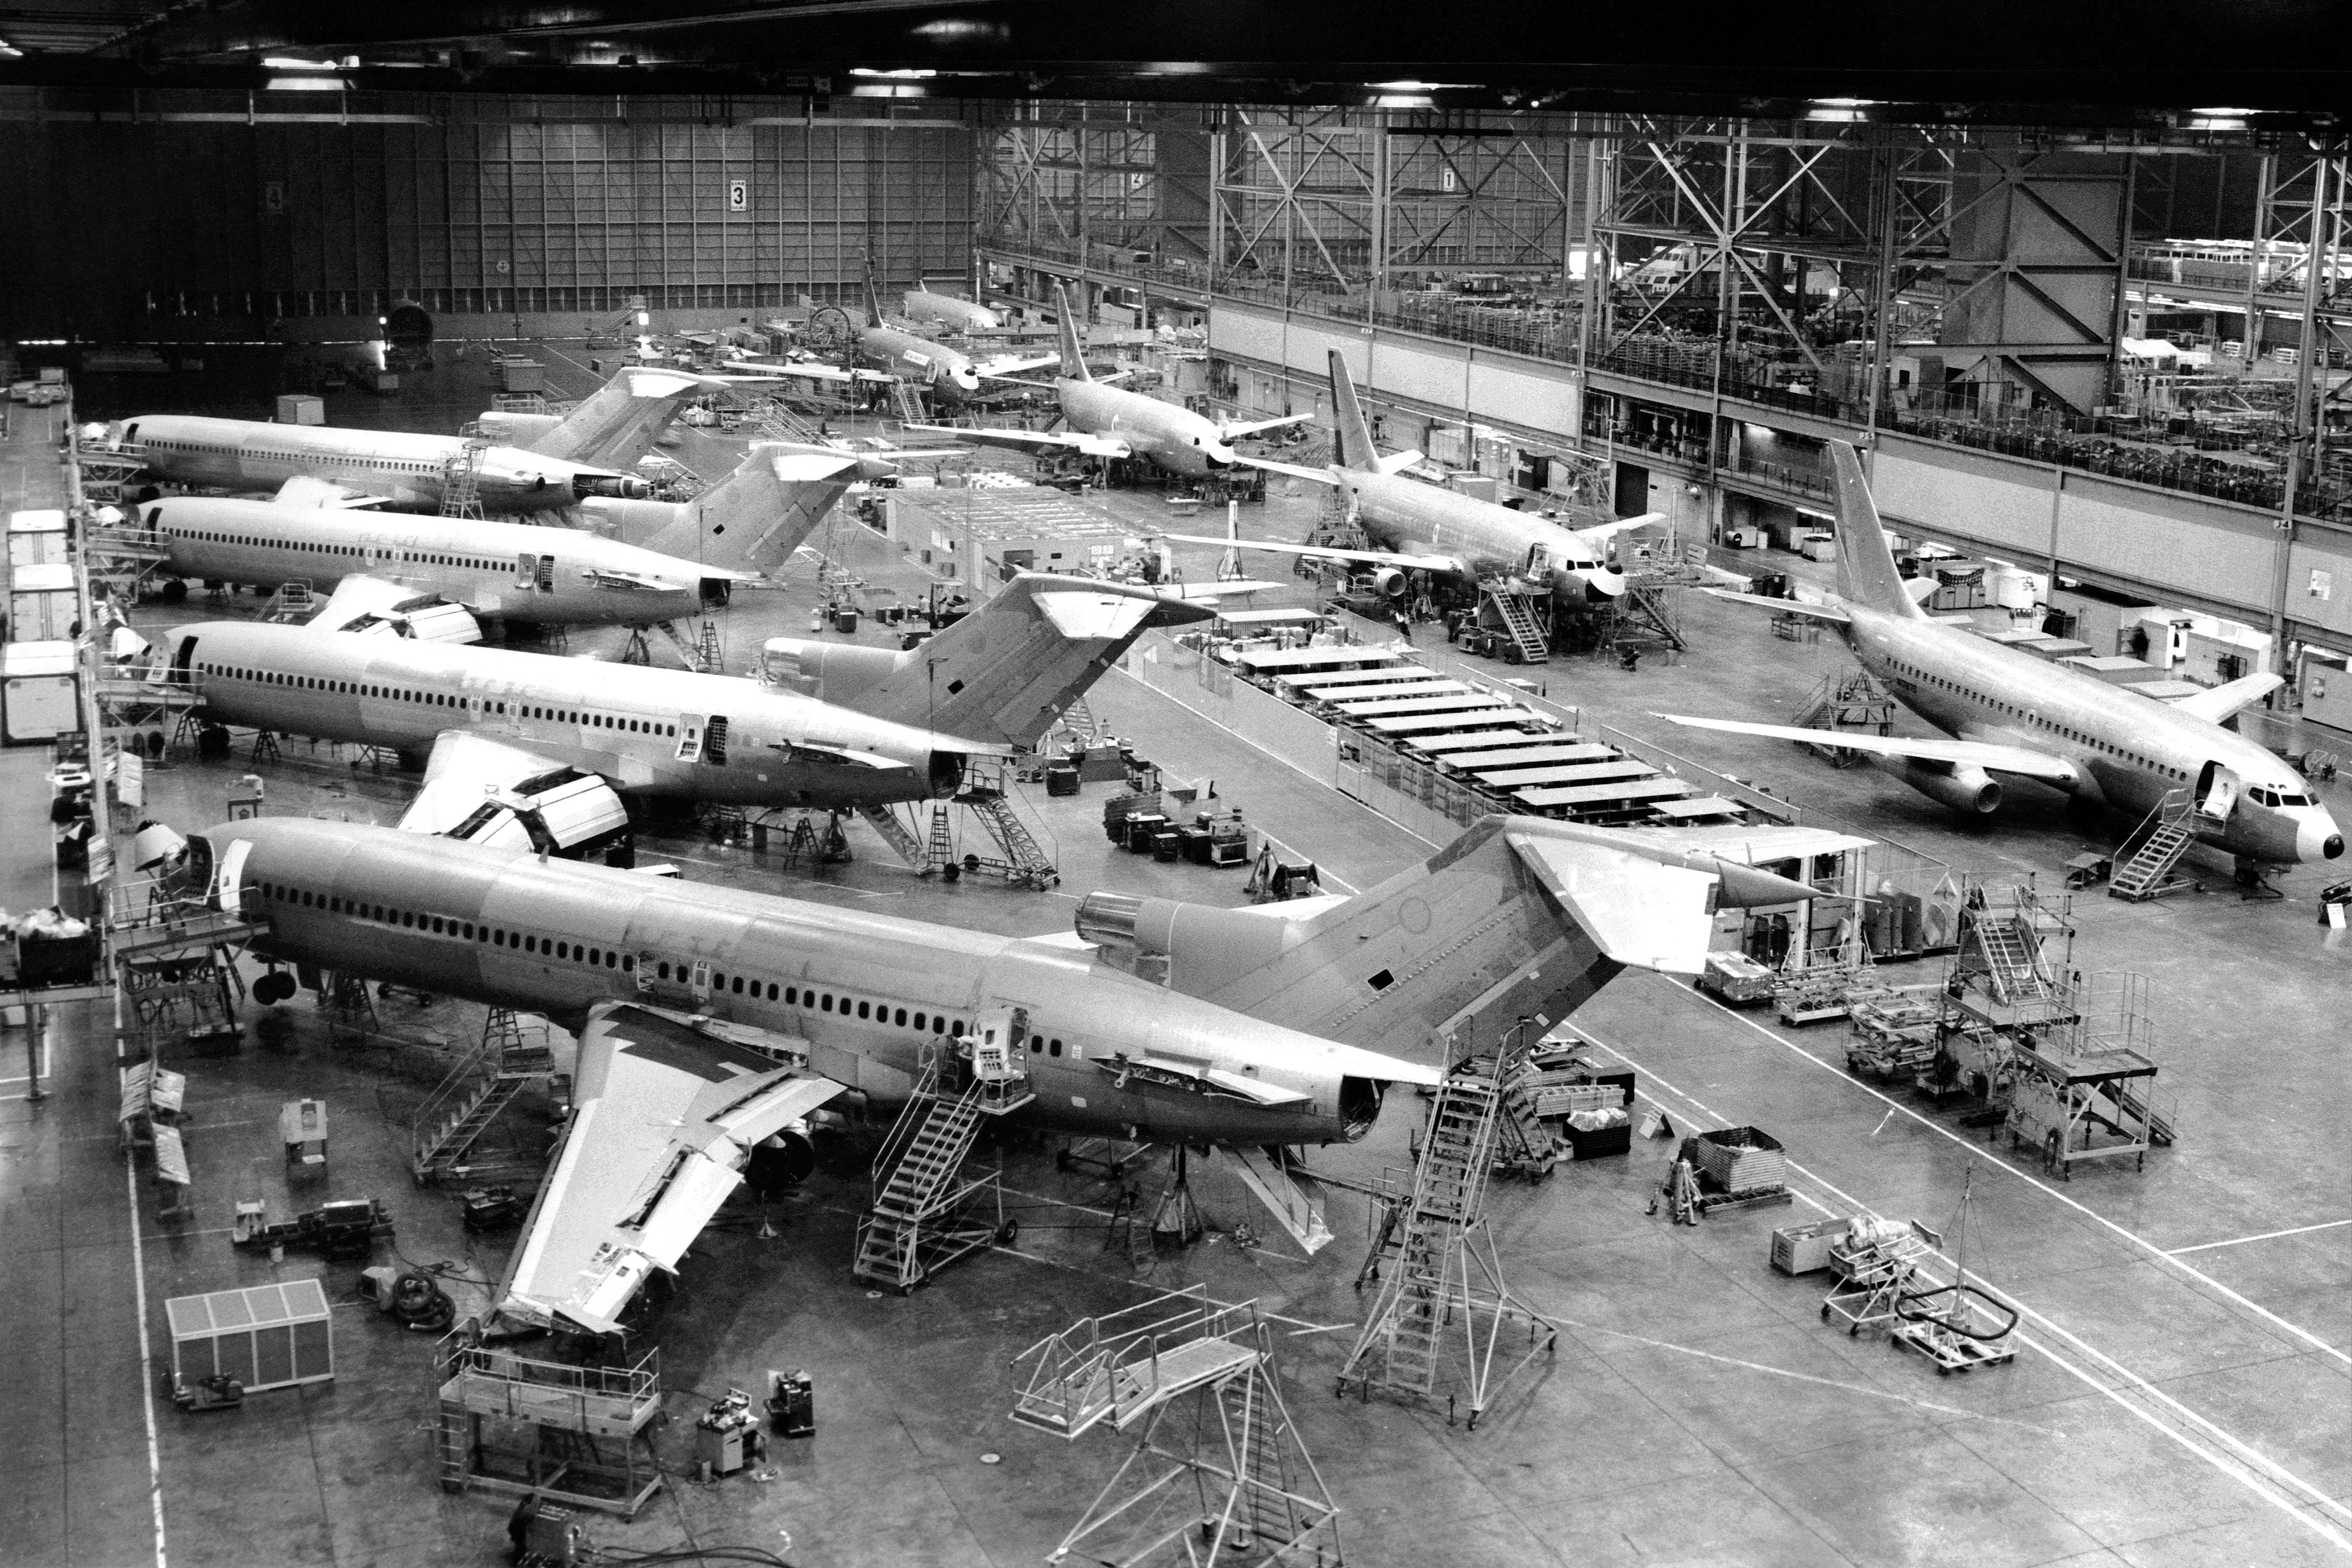 A historic image shows planes being built at a Boeing plant.